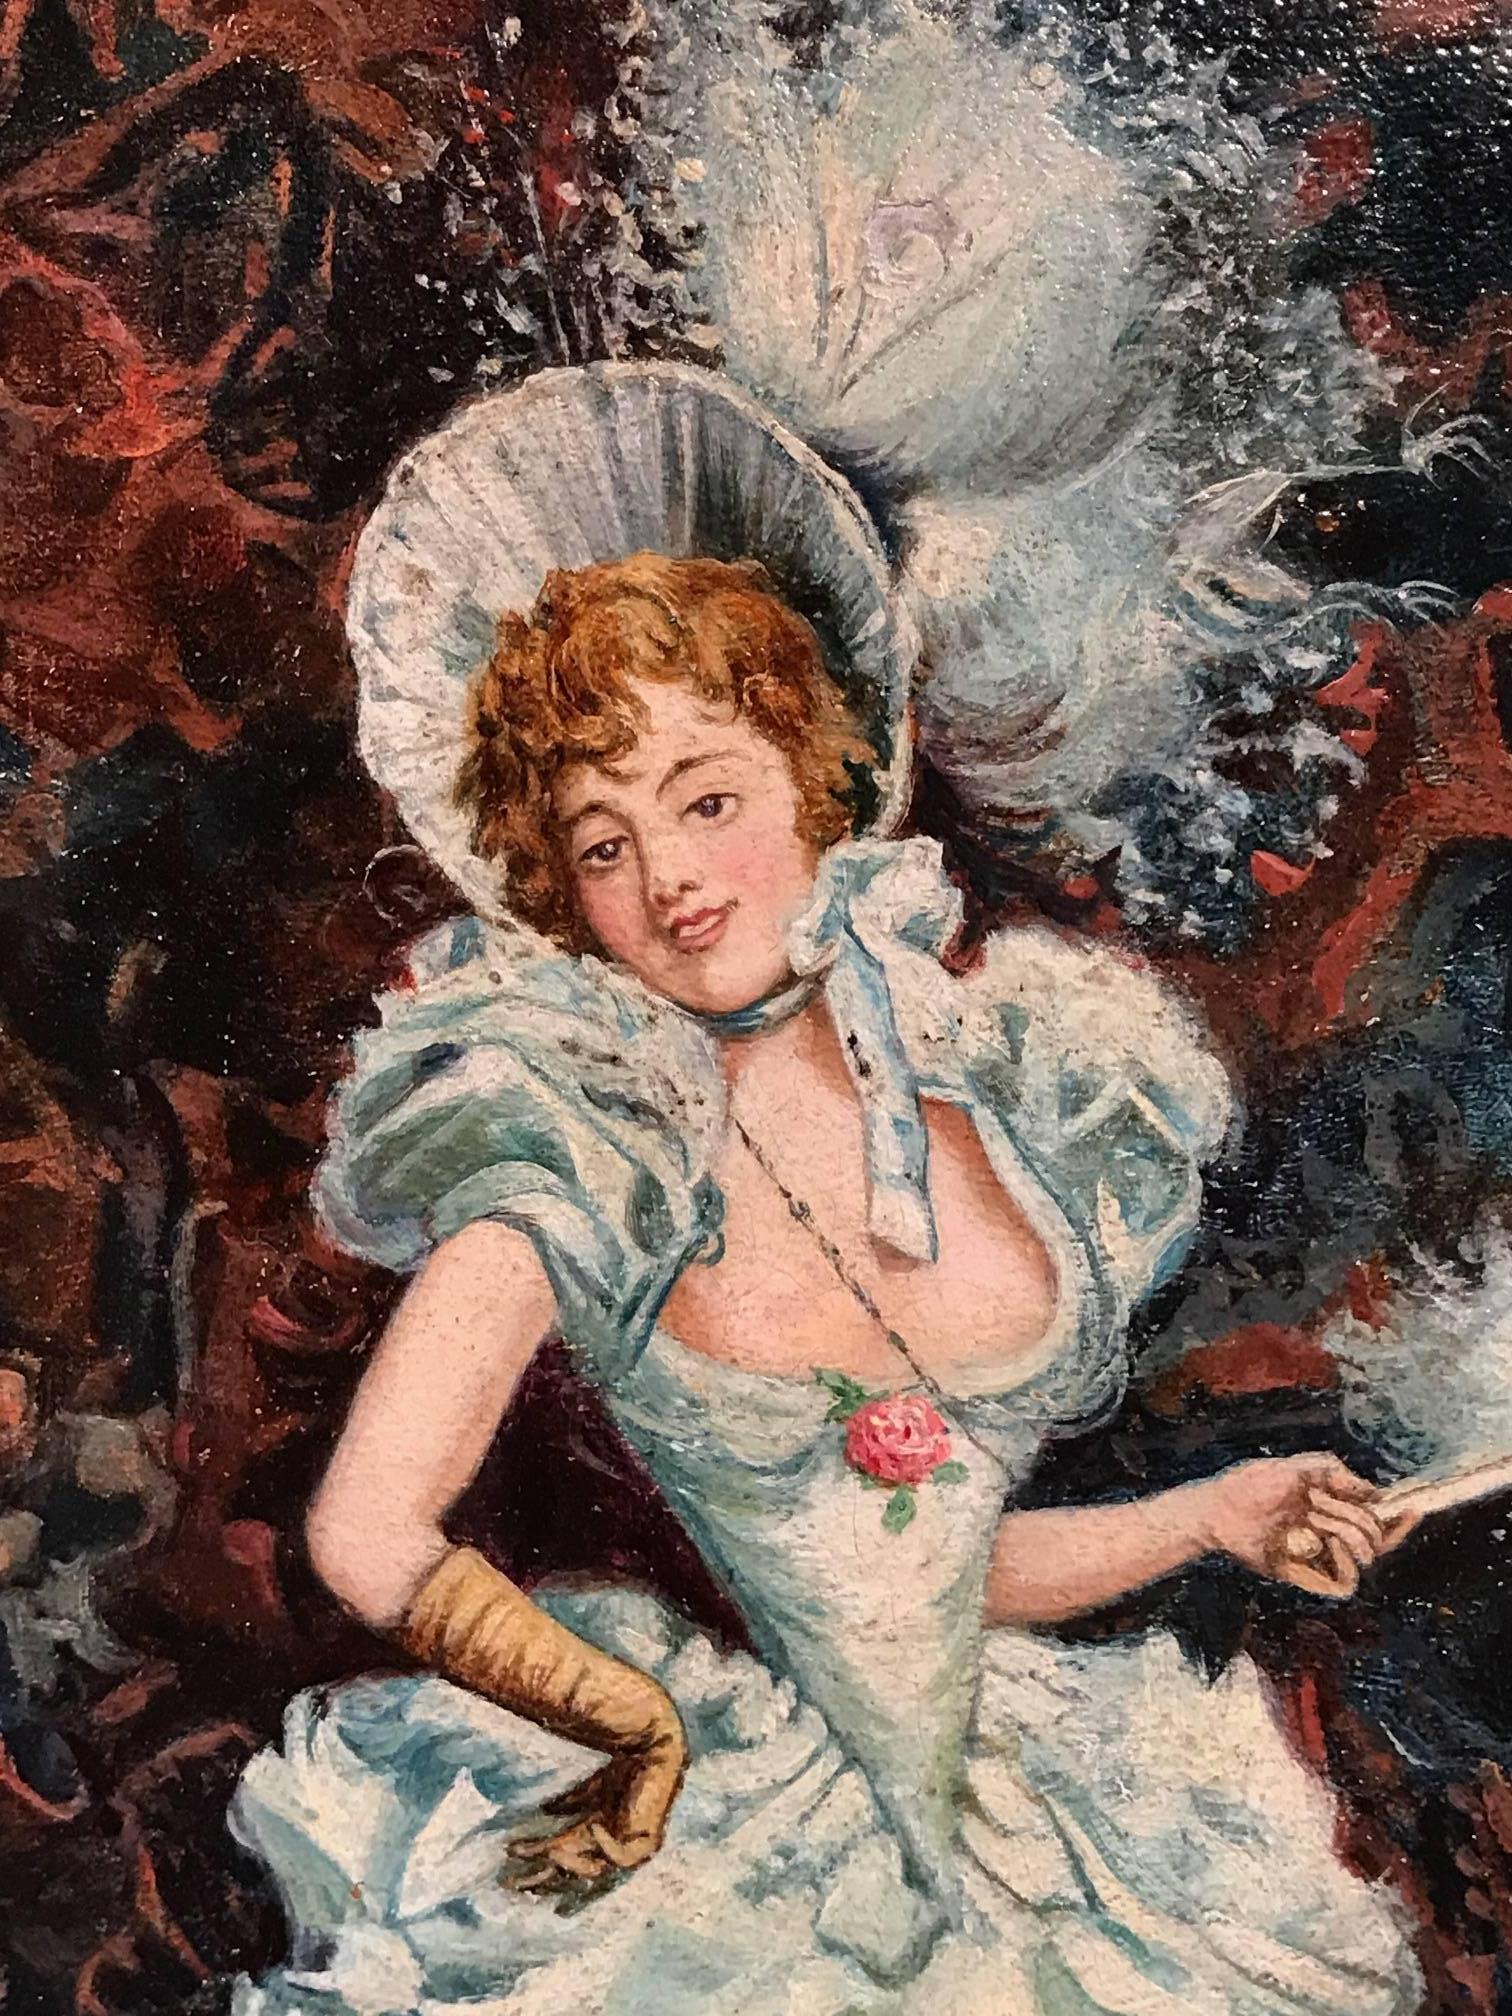 Belle Epoque Gaiety Girl - Antique British Oil Painting - Black Portrait Painting by Dudley Hardy